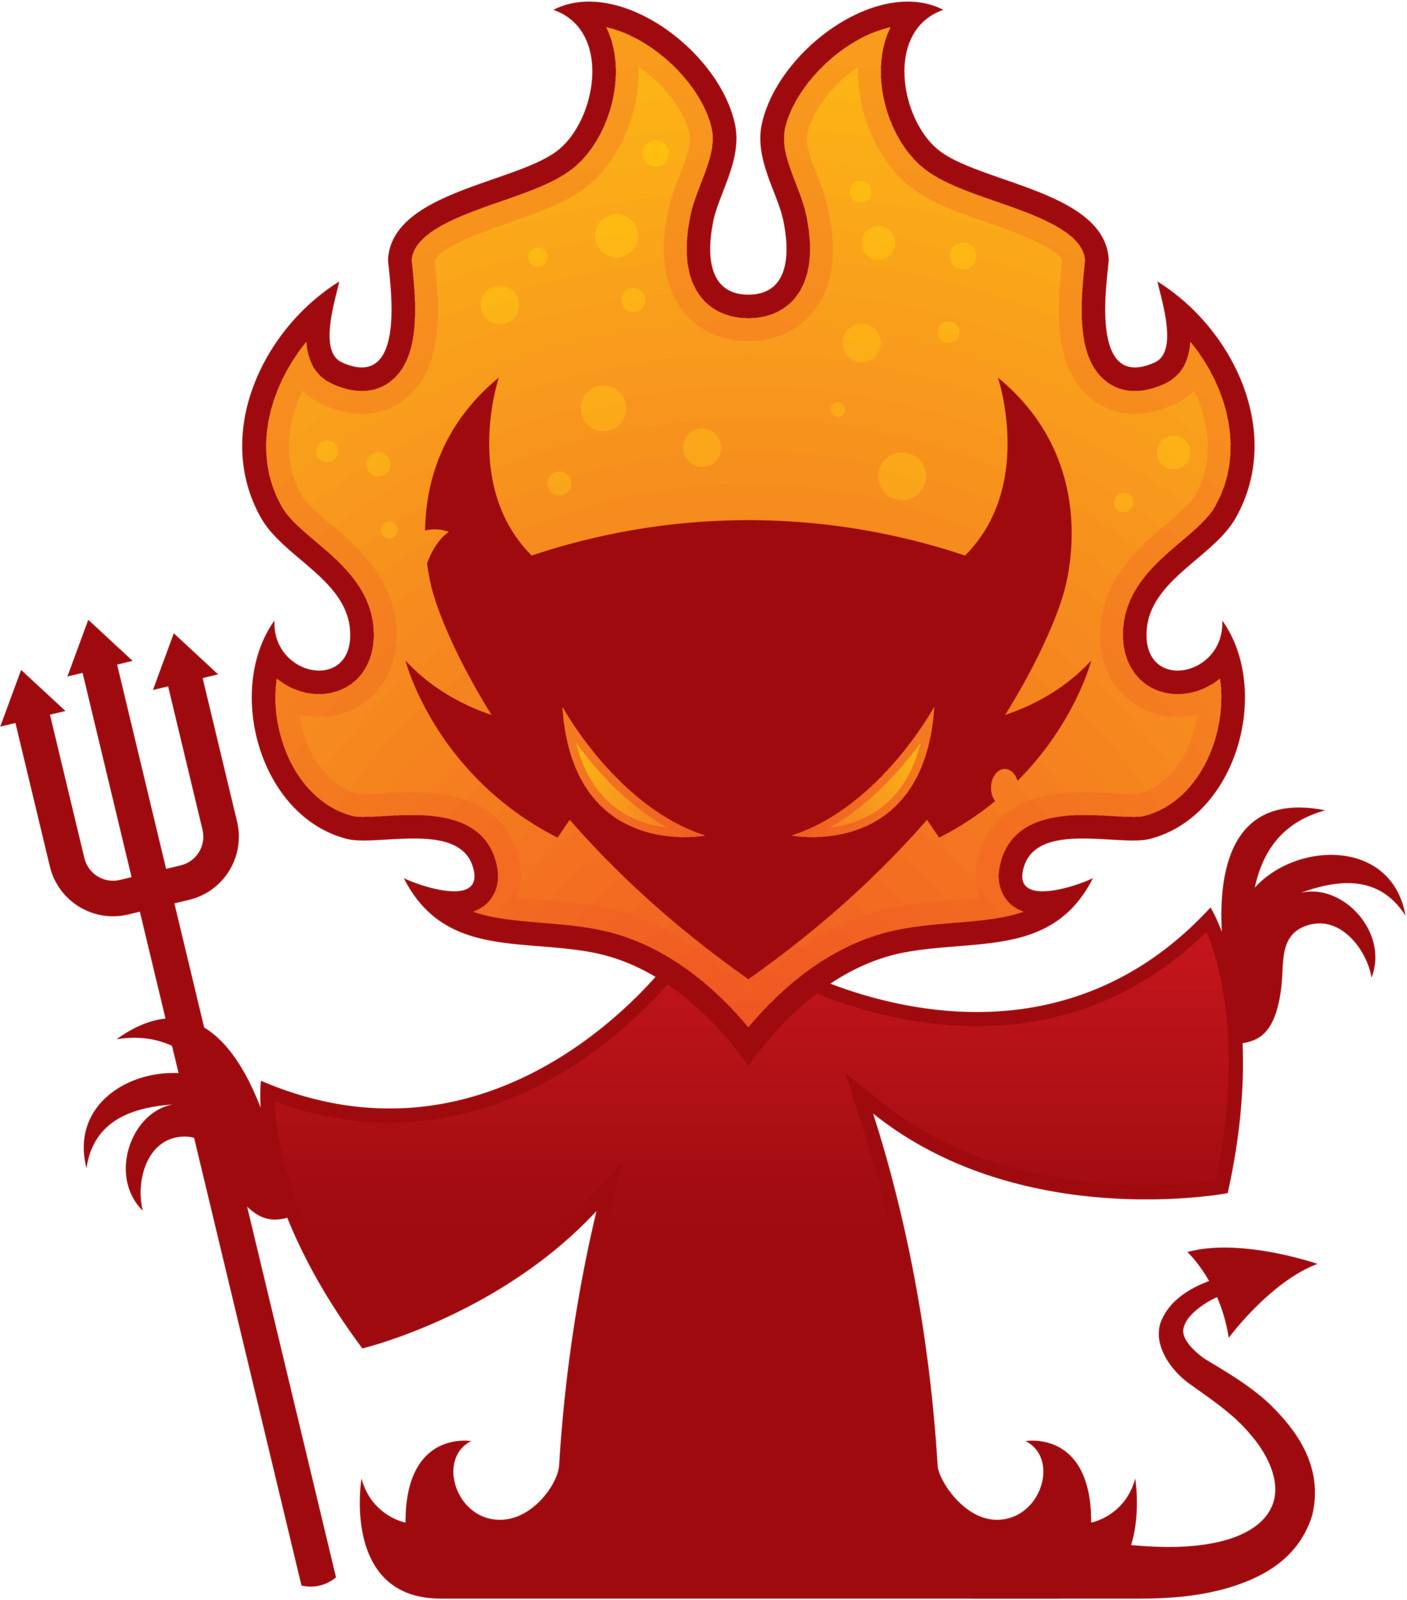 Cartoon vector drawing of a devil with flames around his head holding a pitchfork.